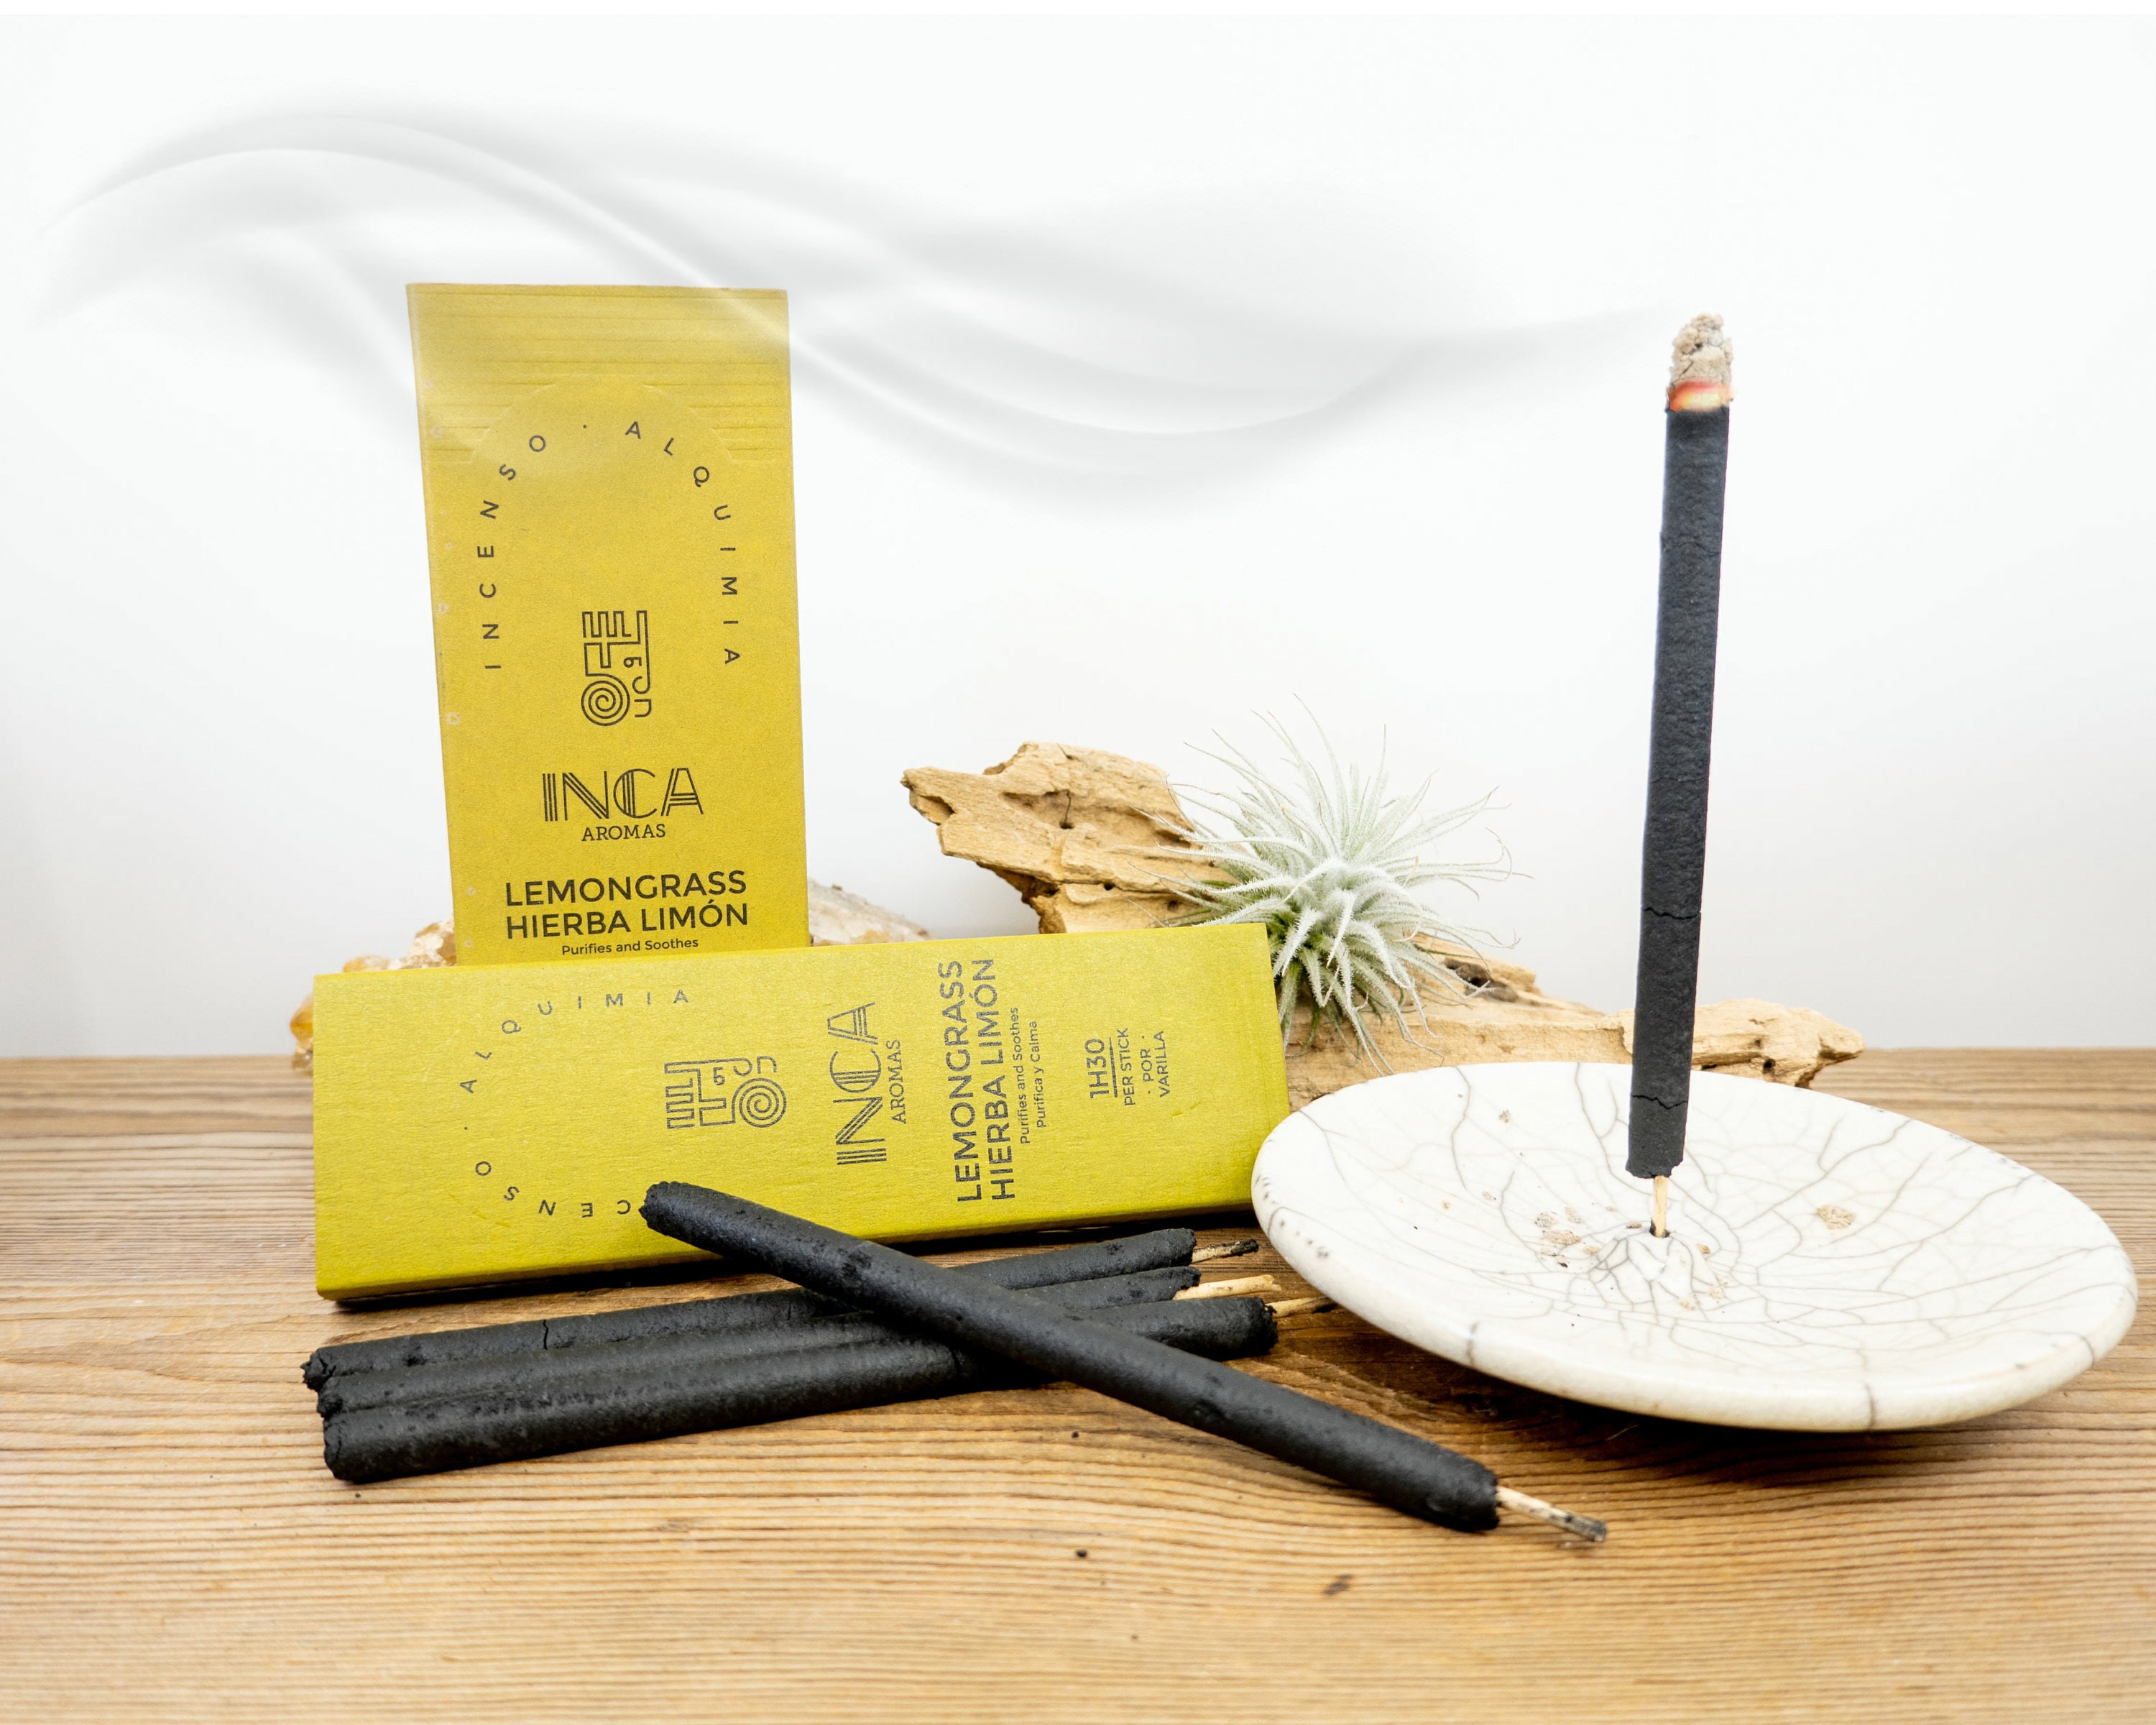 Orange Bamboo Infused with Citronella Lemongrass 30 Sticks with Incense Holder 100% Natural QIWOO Incense Stick 